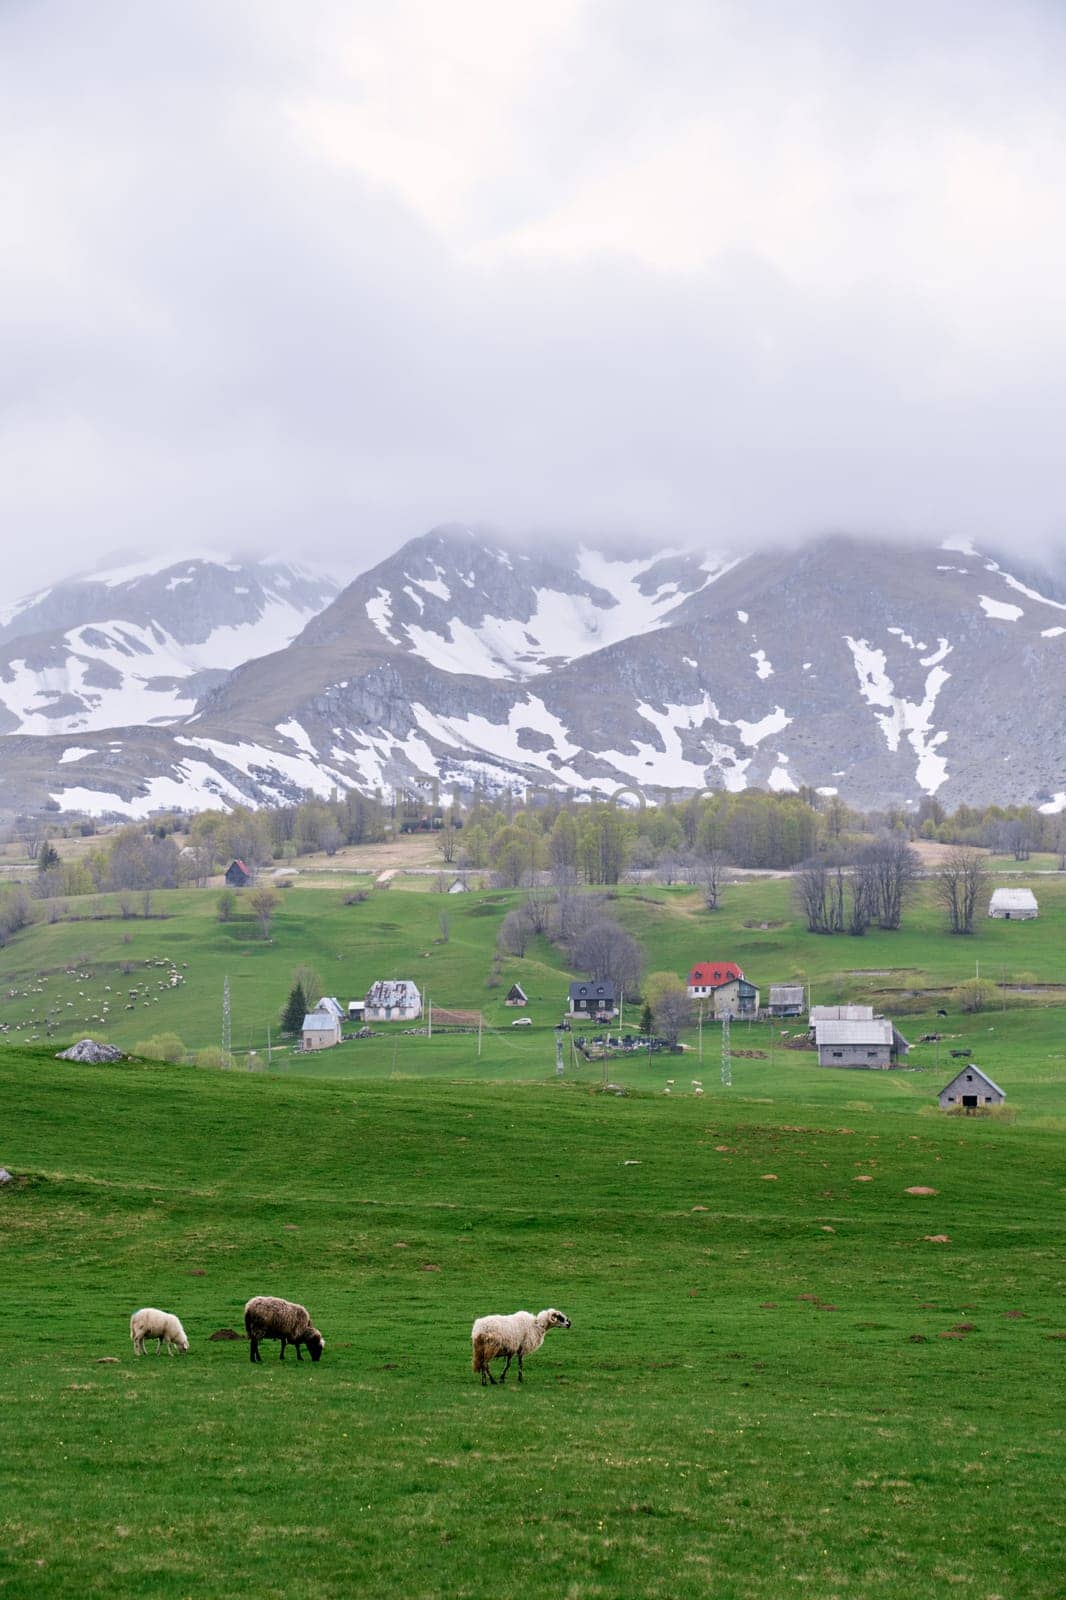 Sheep walk through a green pasture near a village in a valley of snowy mountains. High quality photo